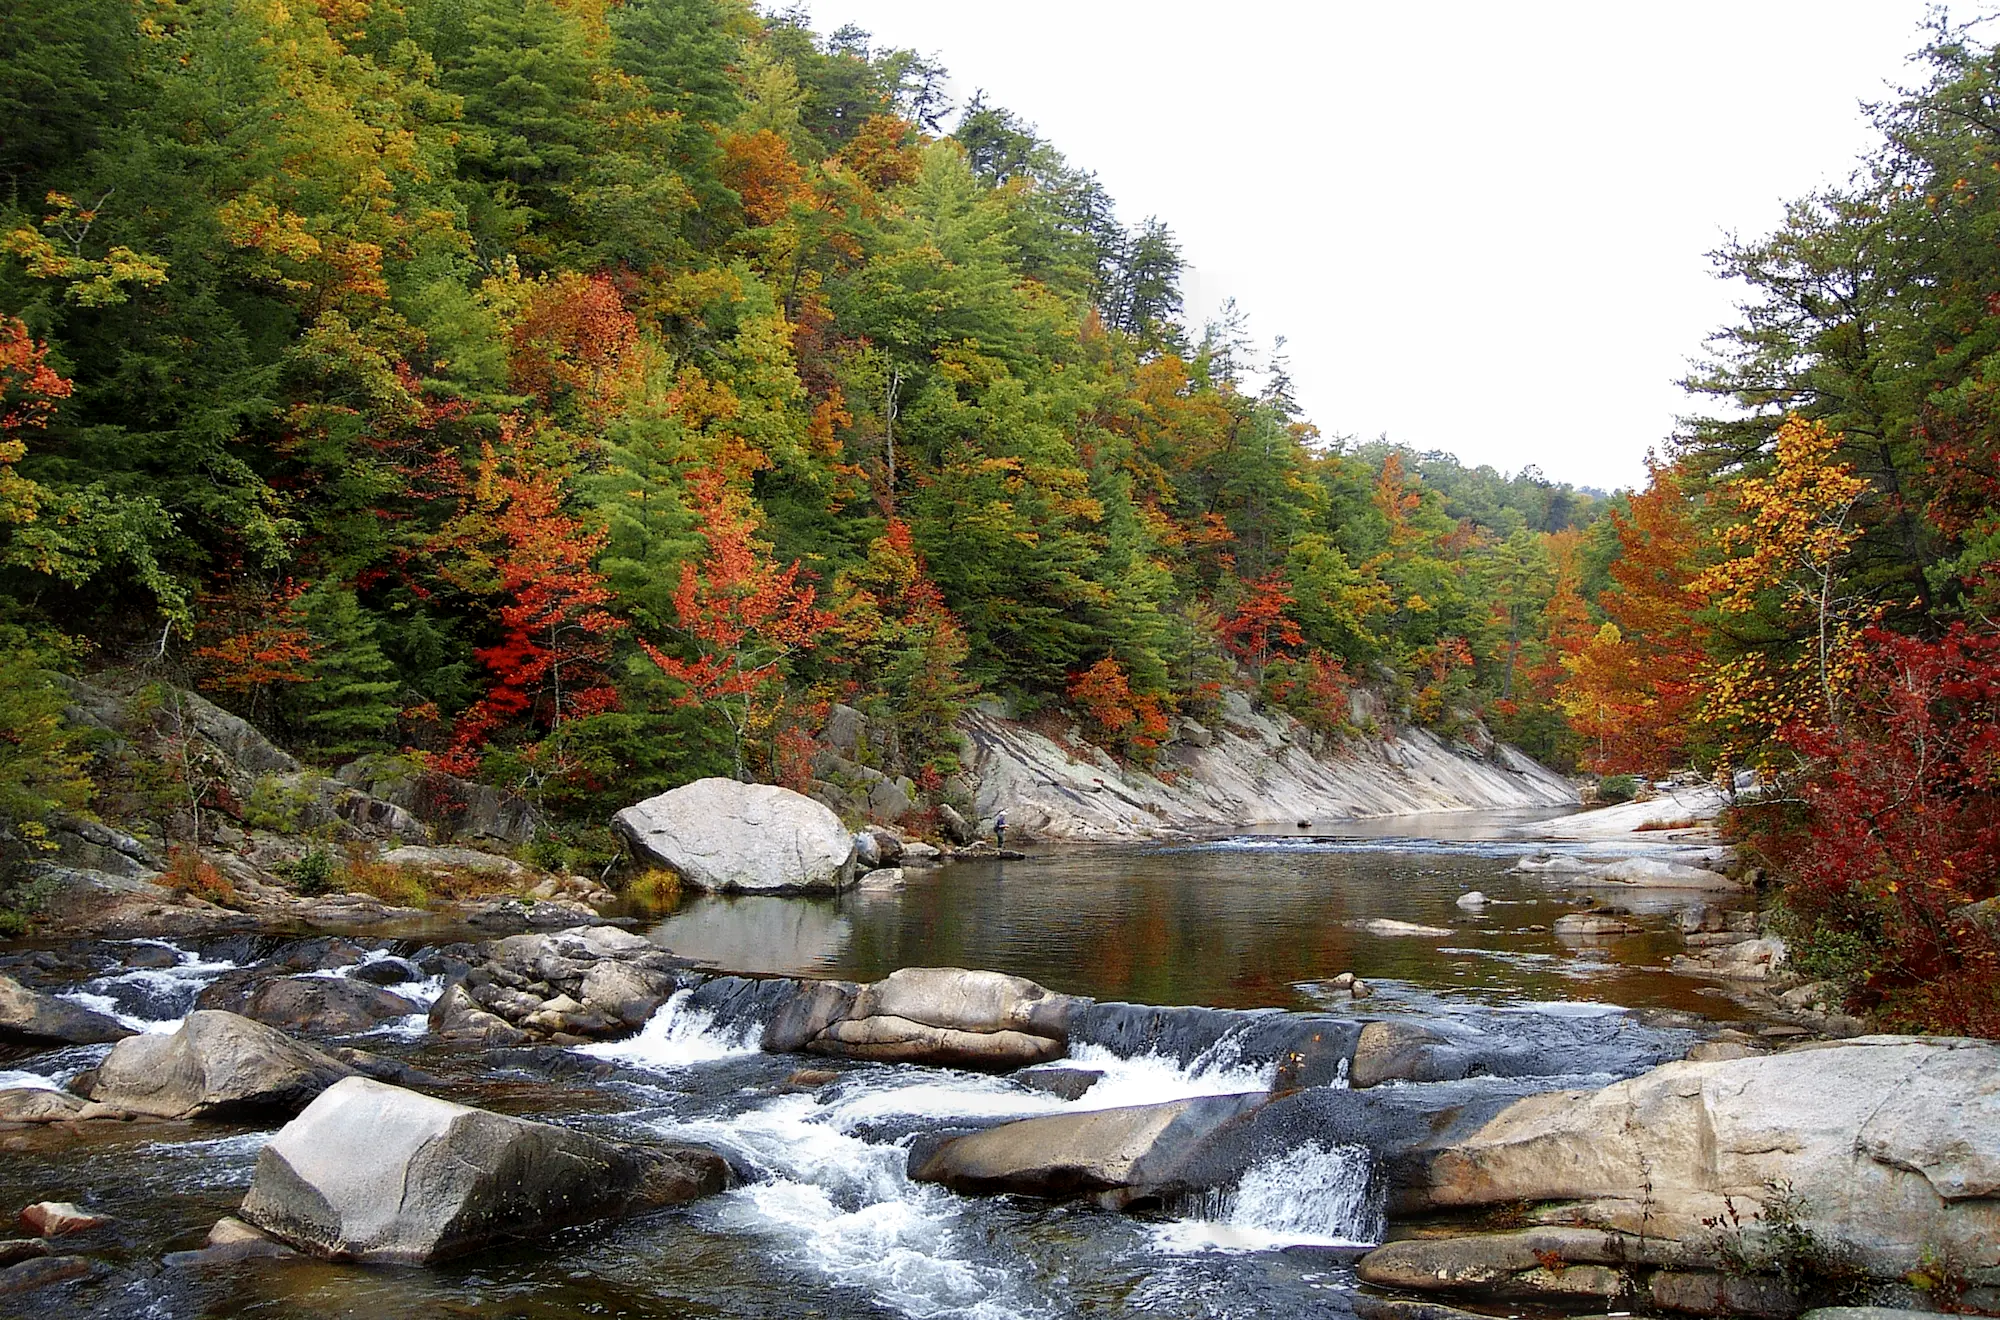 Water flows through a large creek with rocks and fall colors in Lenoir, North Carolina